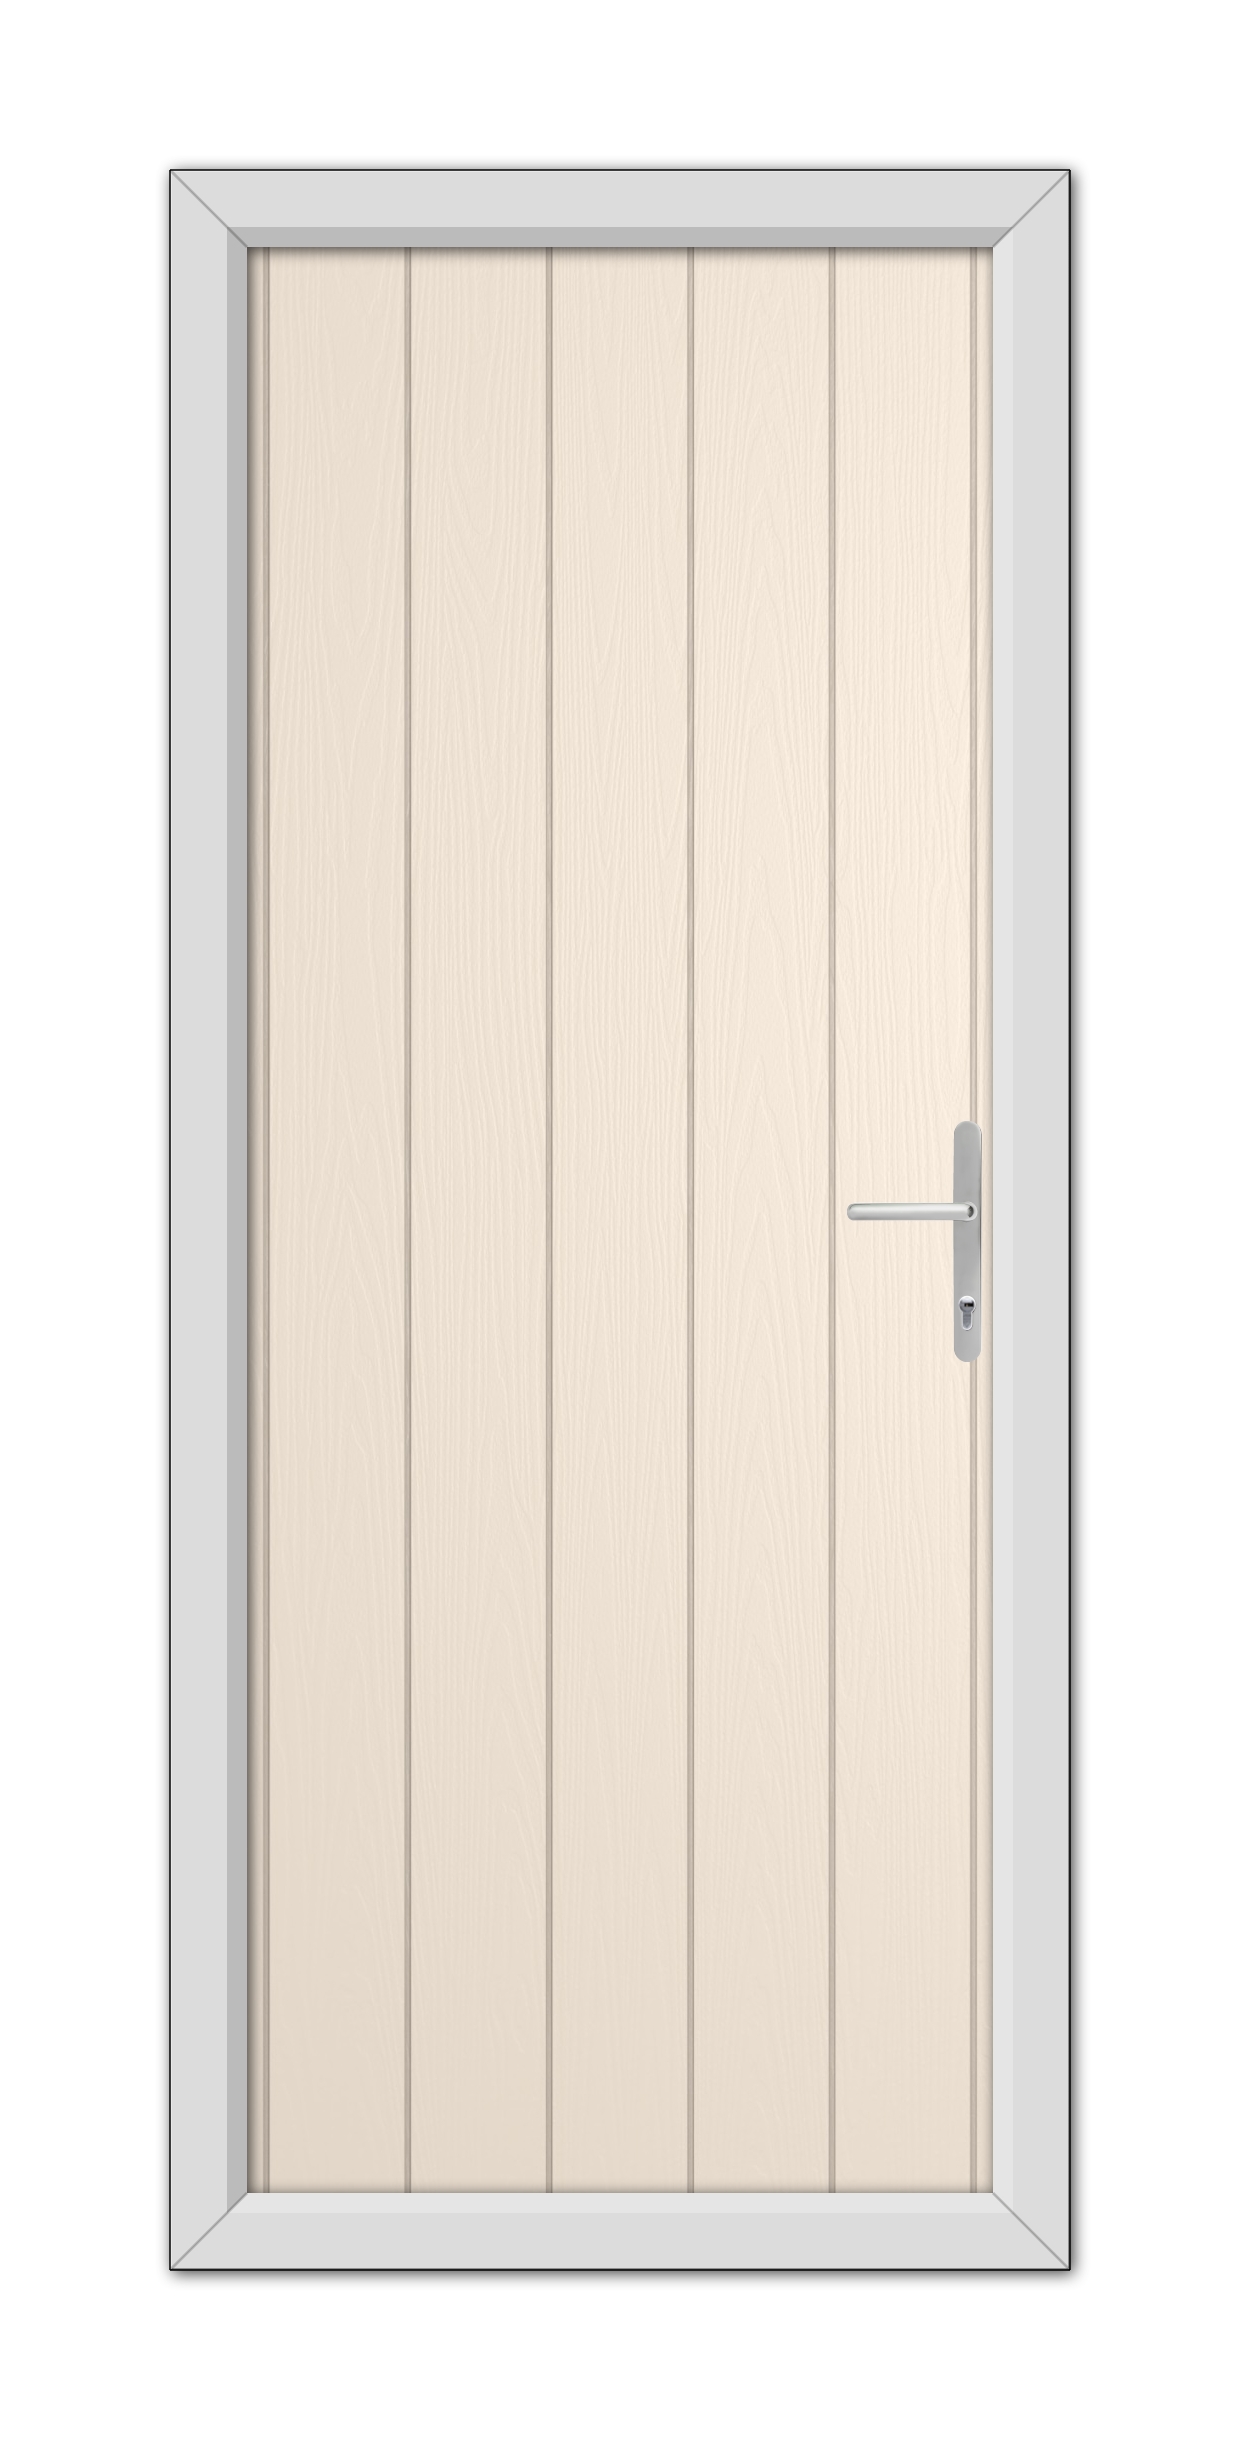 A modern Cream Norfolk Solid Composite Door 48mm Timber Core with a metallic handle, framed by a gray border.